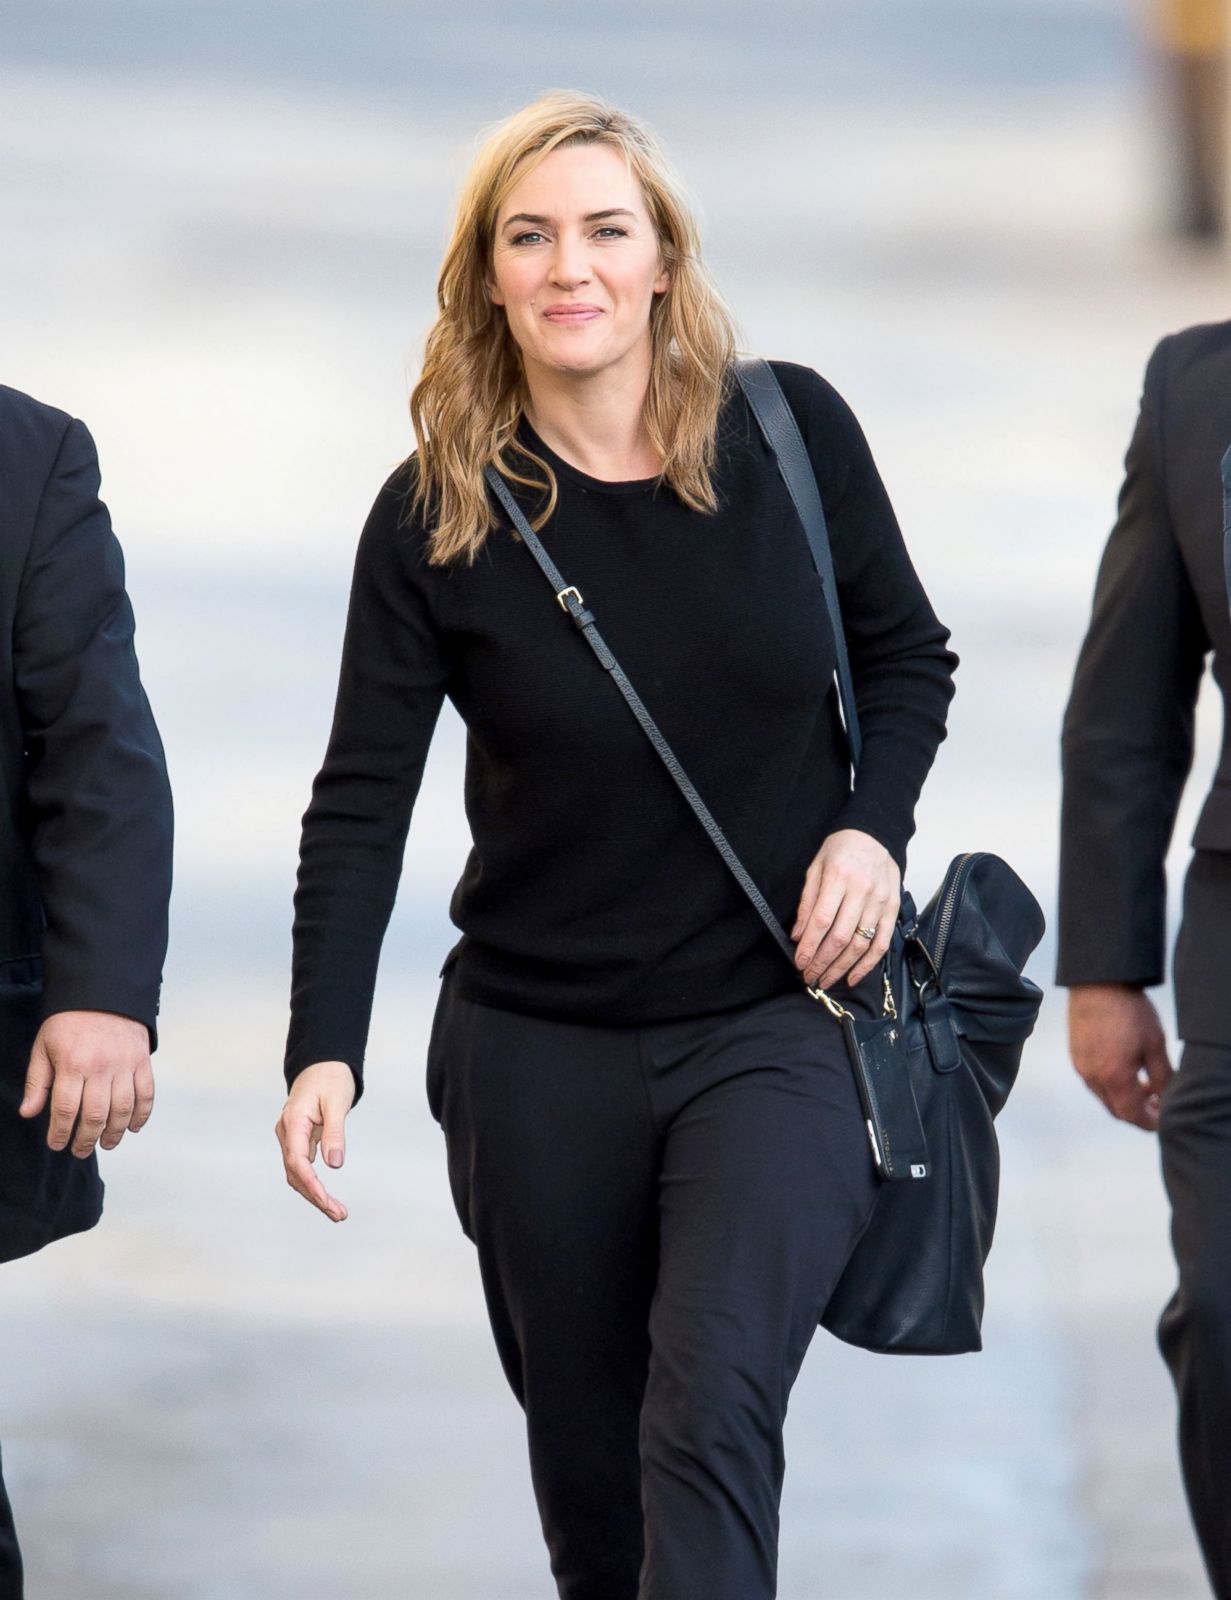 Kate Winslet Goes Low-Key in All Black Picture | February's Top Celebrity Pictures ...1231 x 1600